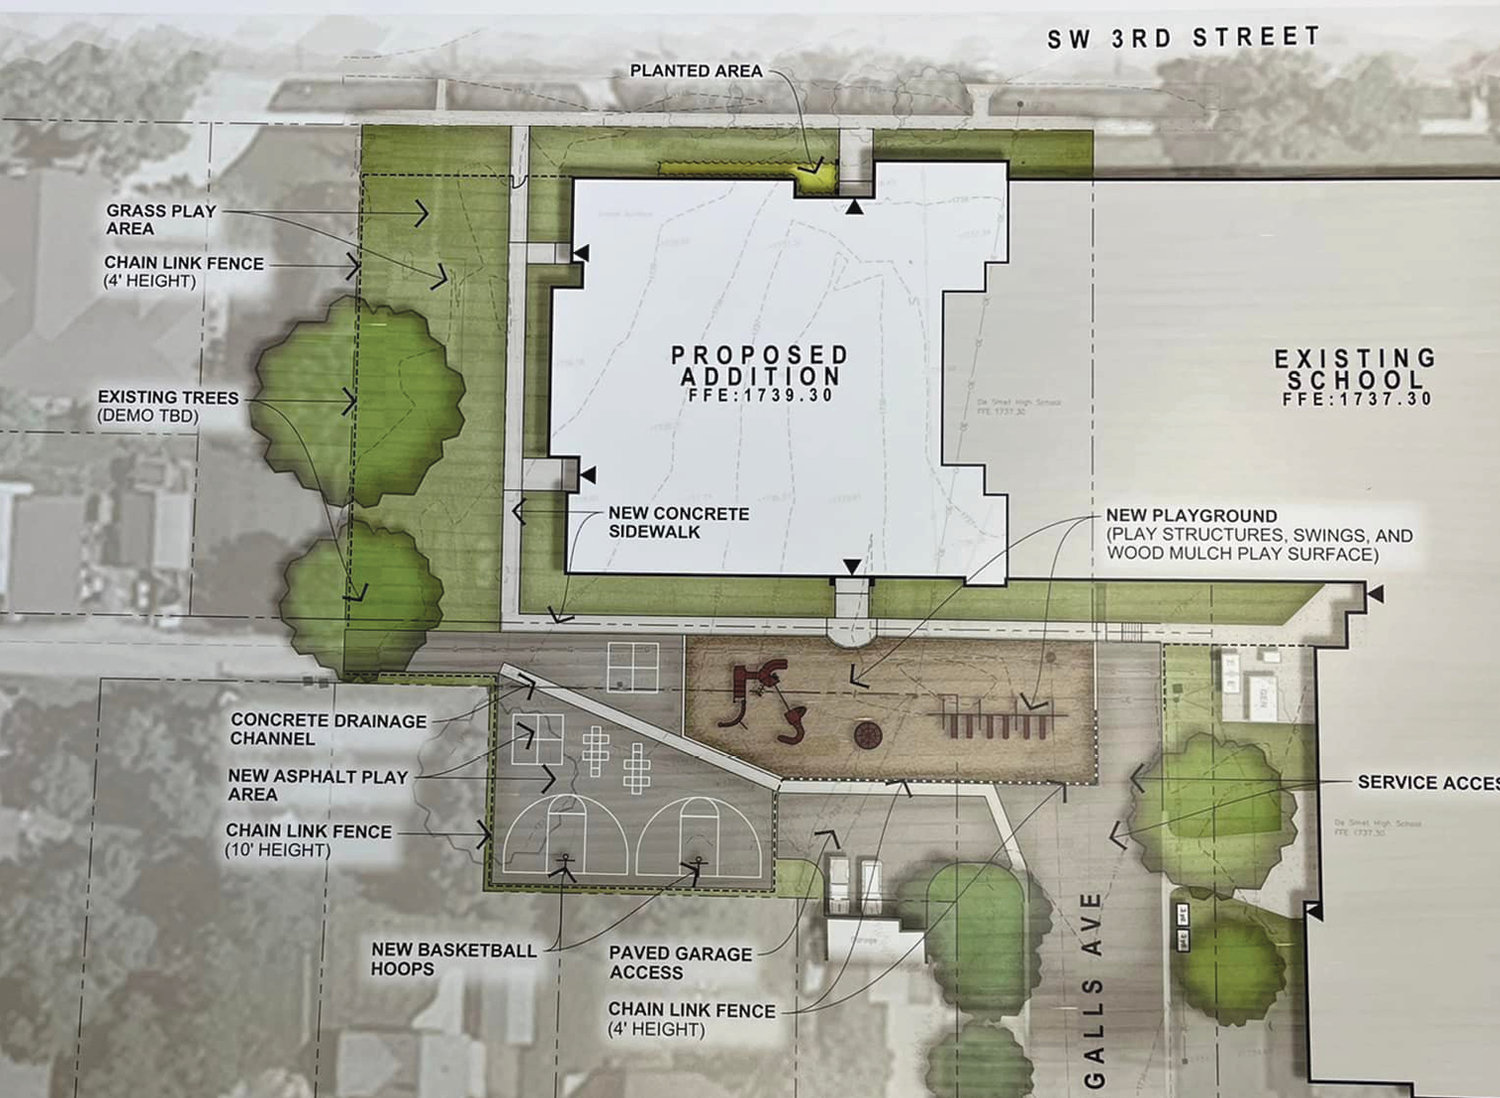 The structure is proposed as an addition on the west side of the existing high school campus.